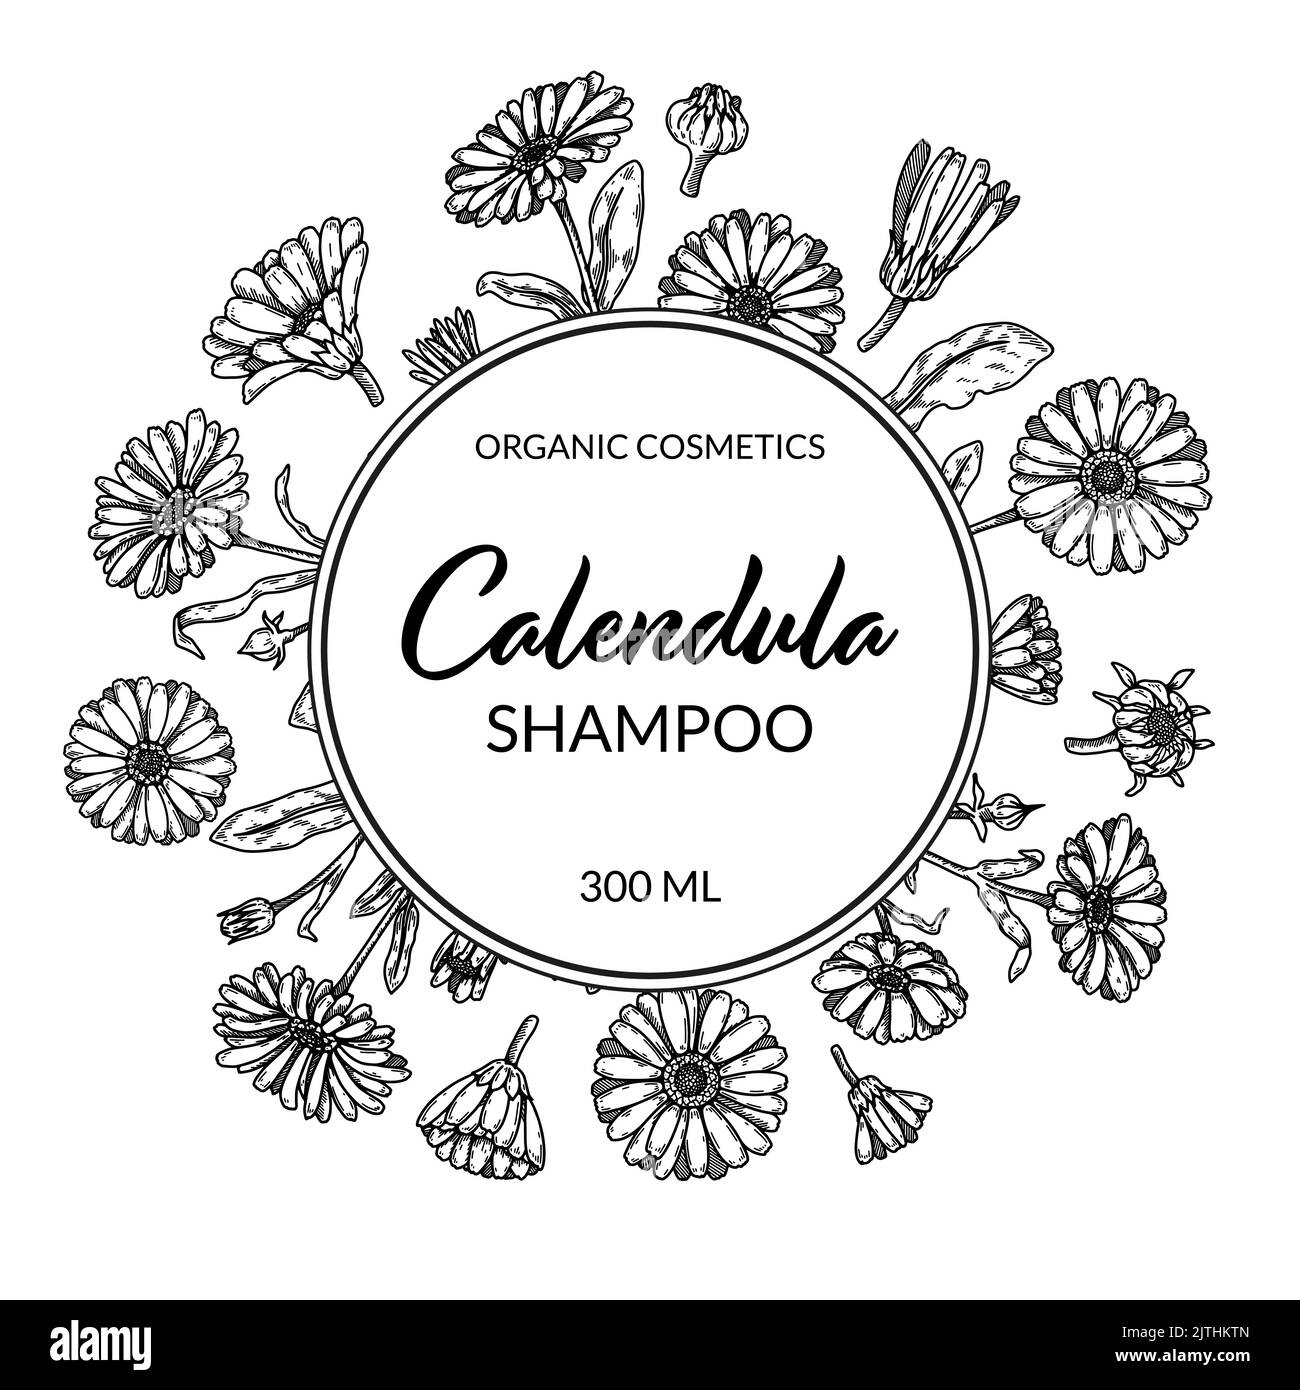 Calendula frame with hand drawn elements. Vector illustration in sketch style. Vintage packaging design Stock Vector